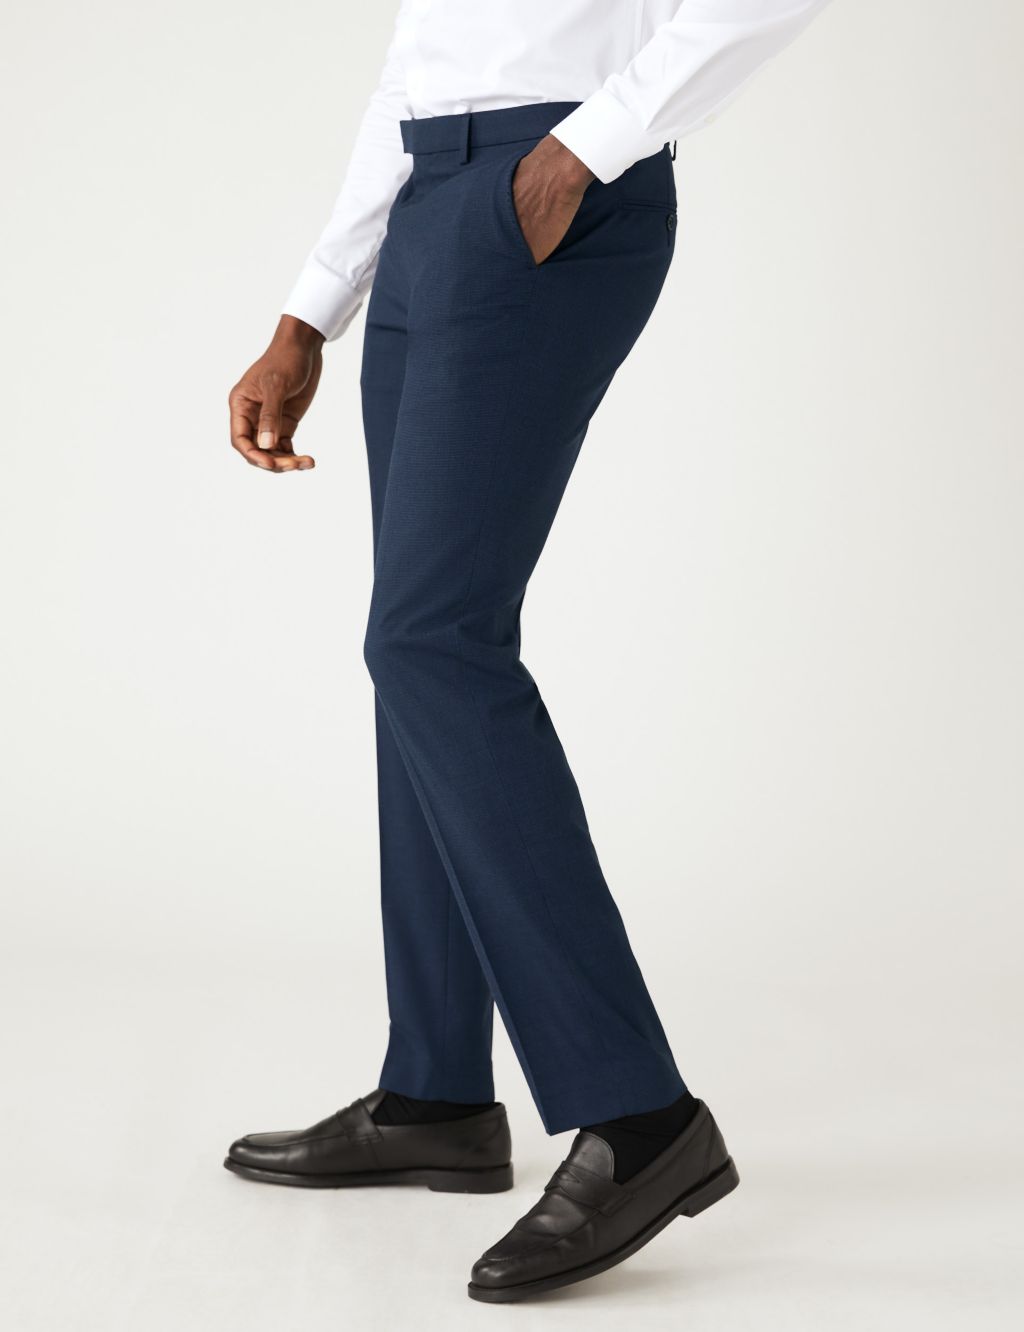 Textured Stretch Trousers image 3